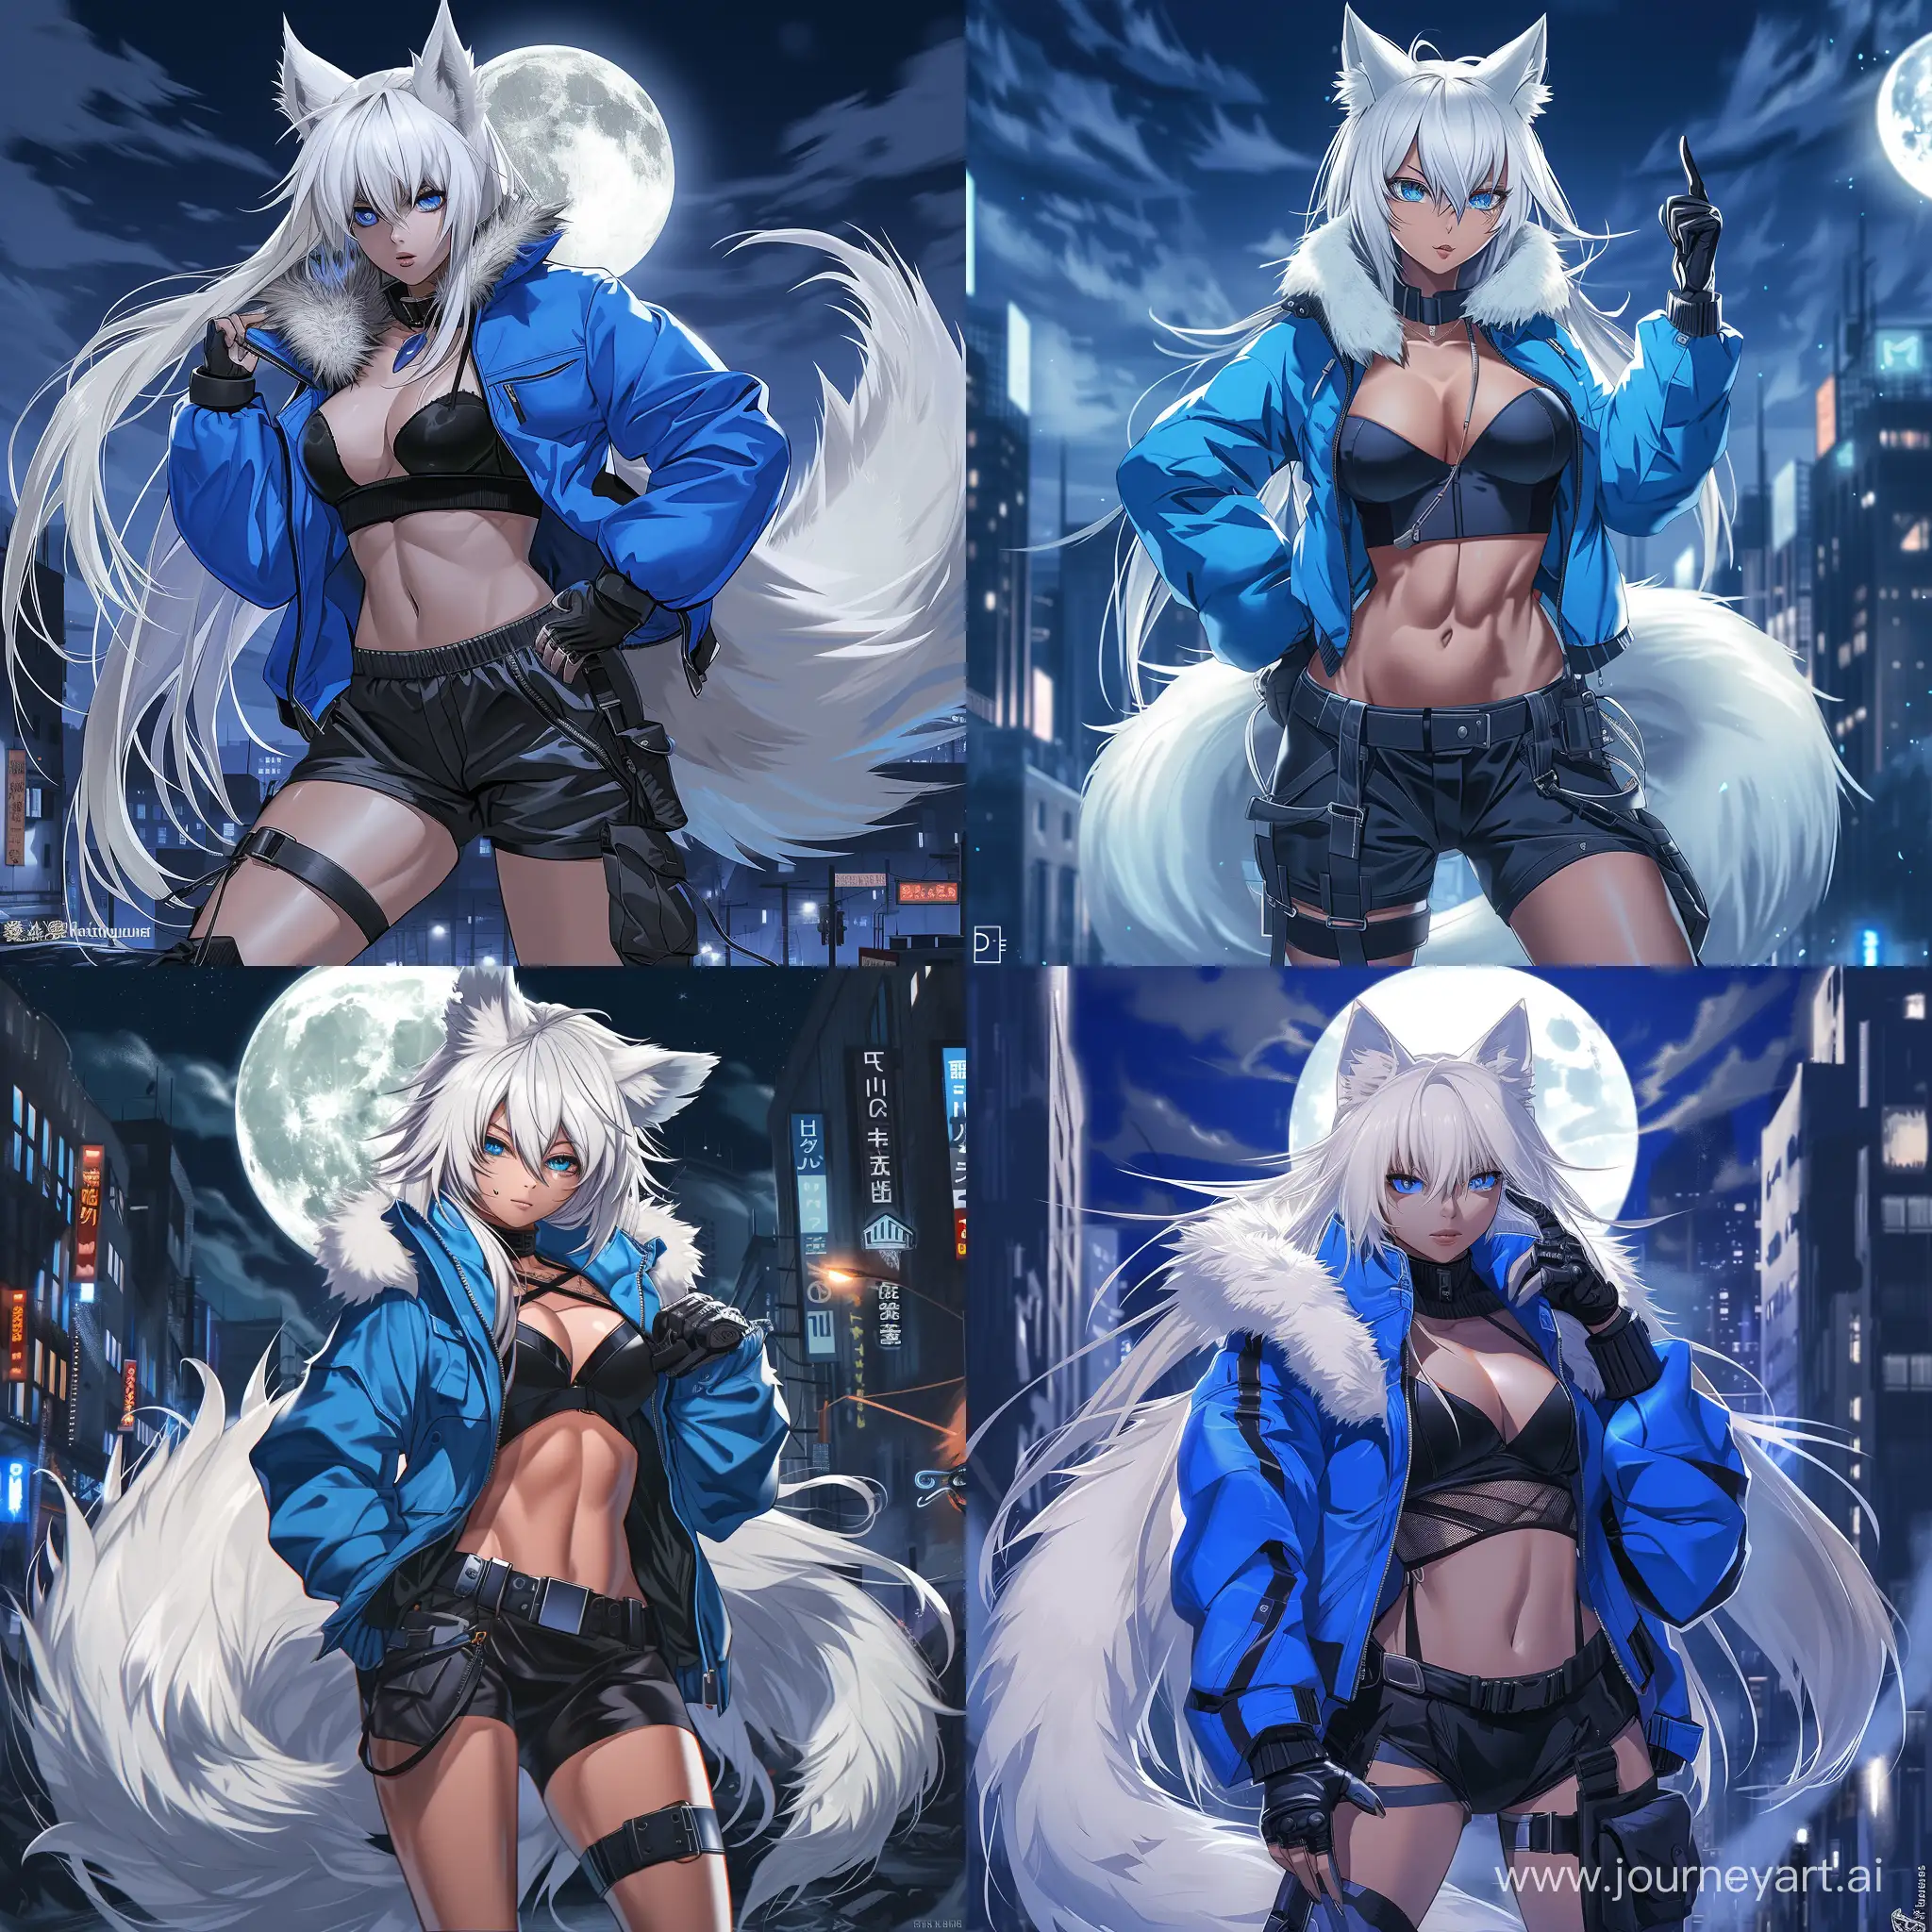 anime-style, full body, athletic, muscular, tan skin, adult woman, long white hair, white fox ears, white fox tail attached to her waist, fierce blue eyes, blue jacket, black sports bra, baggy black cargo pants, black boots, black leather gloves, dynamic, city, night, full moon, fur collar